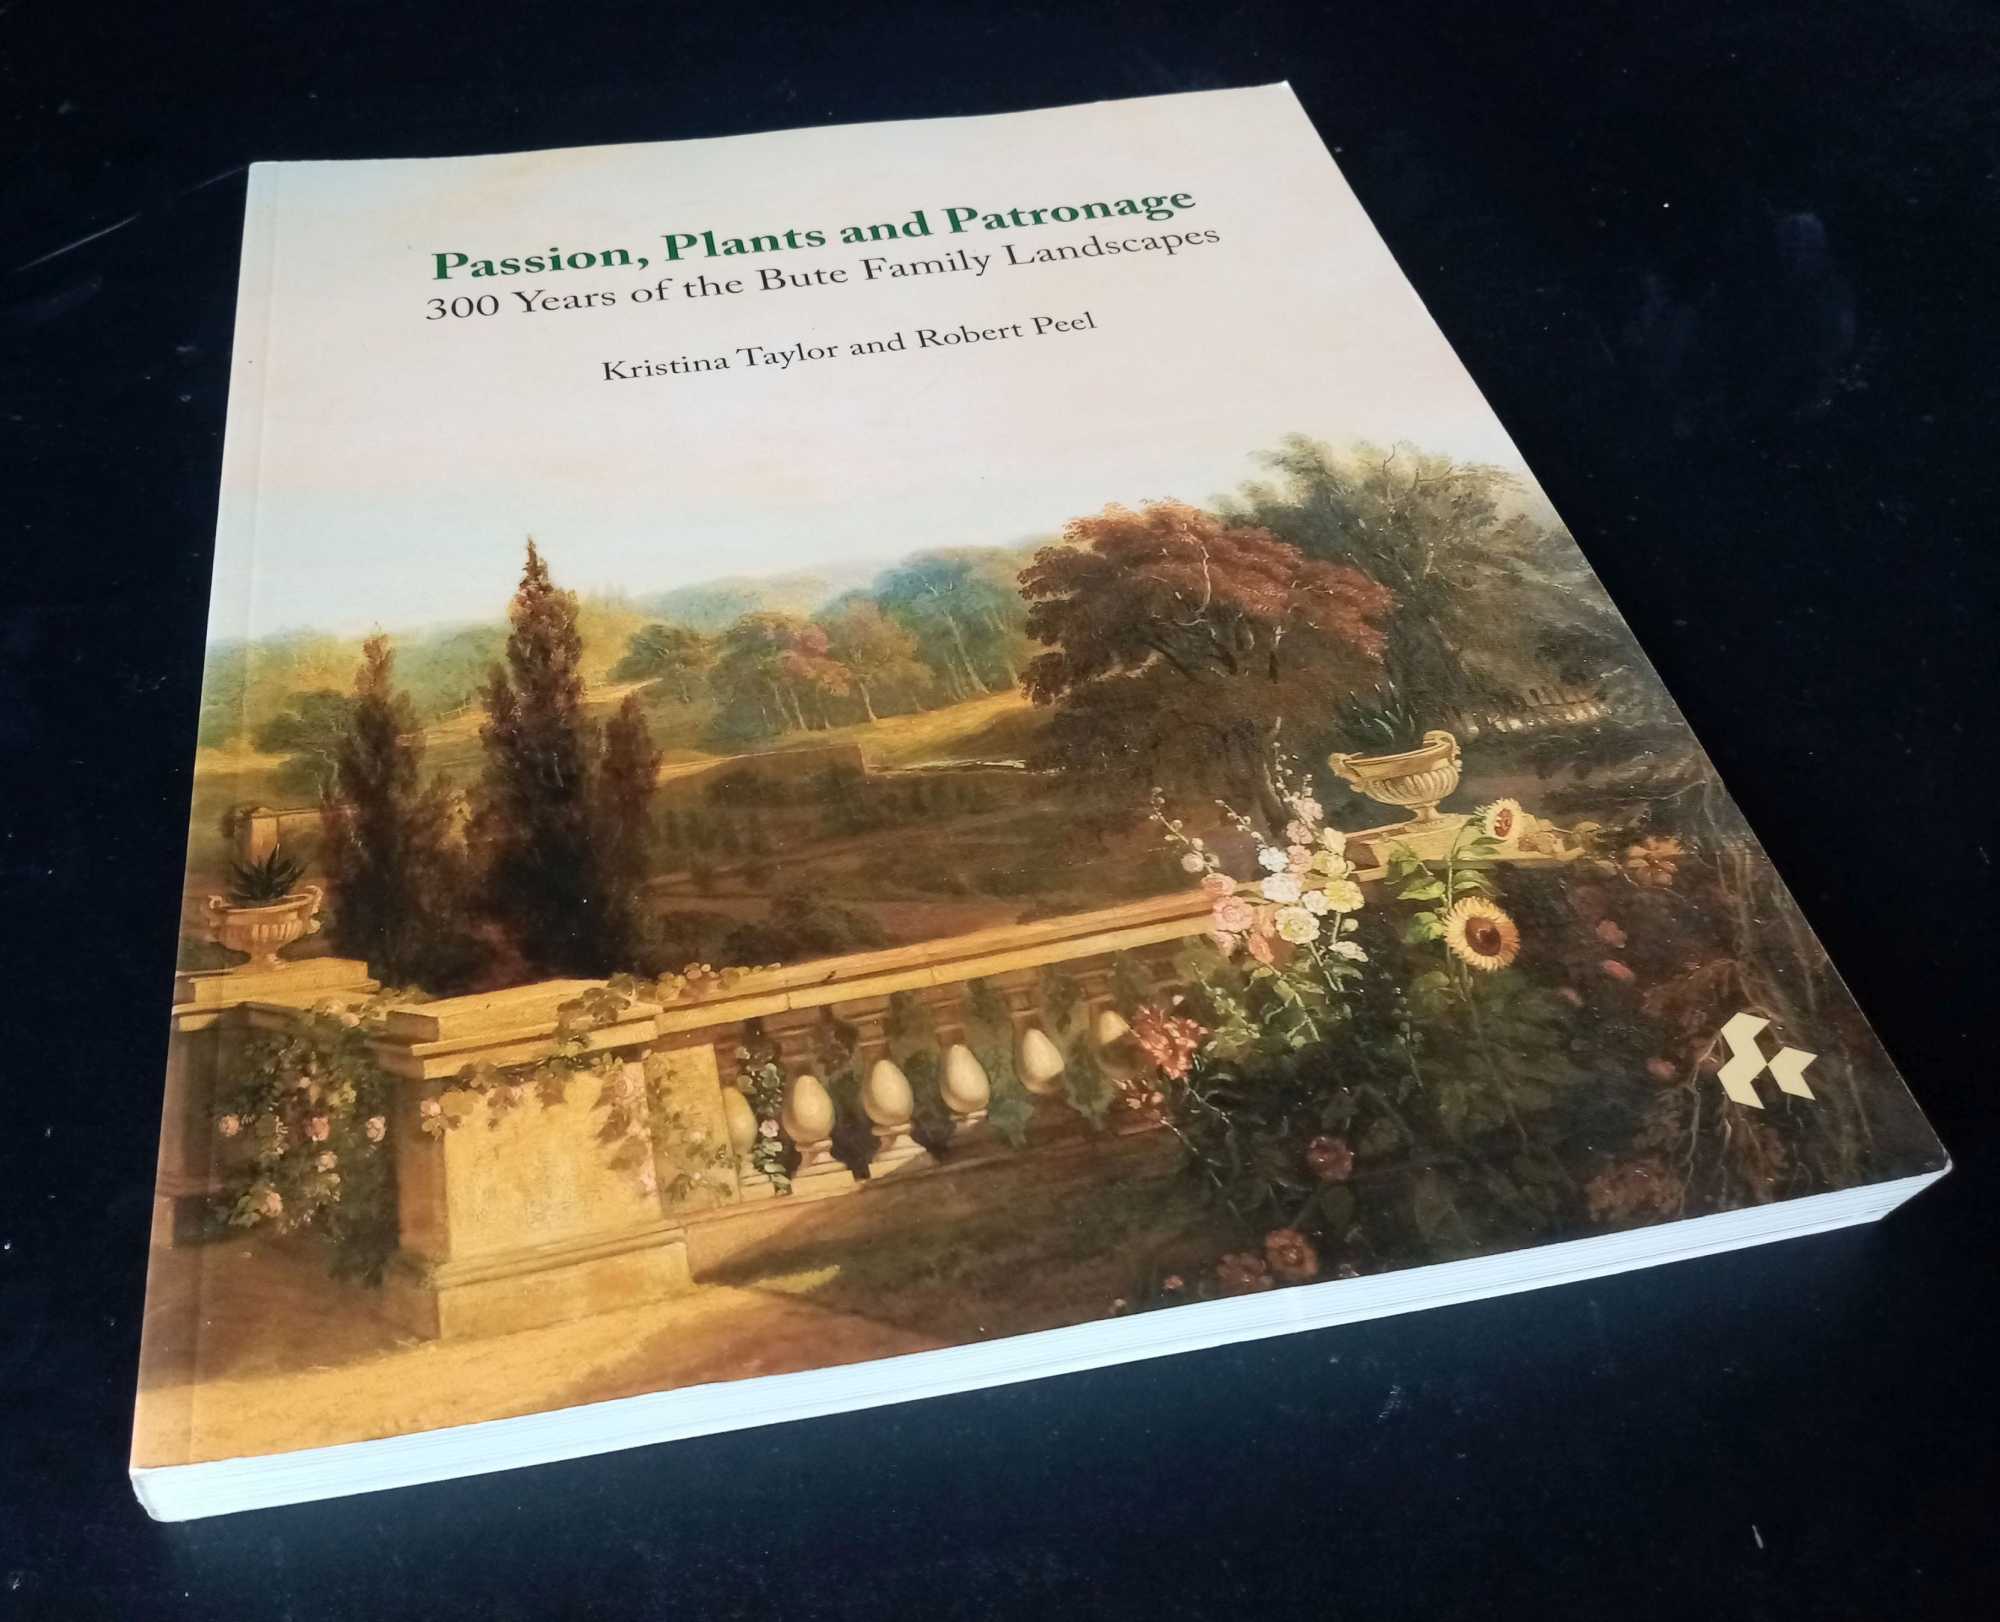 Kristina Taylor, Robert Peel - Passion, Plants and Patronage: 300 Years of the Bute Family Landscapes   SIGNED